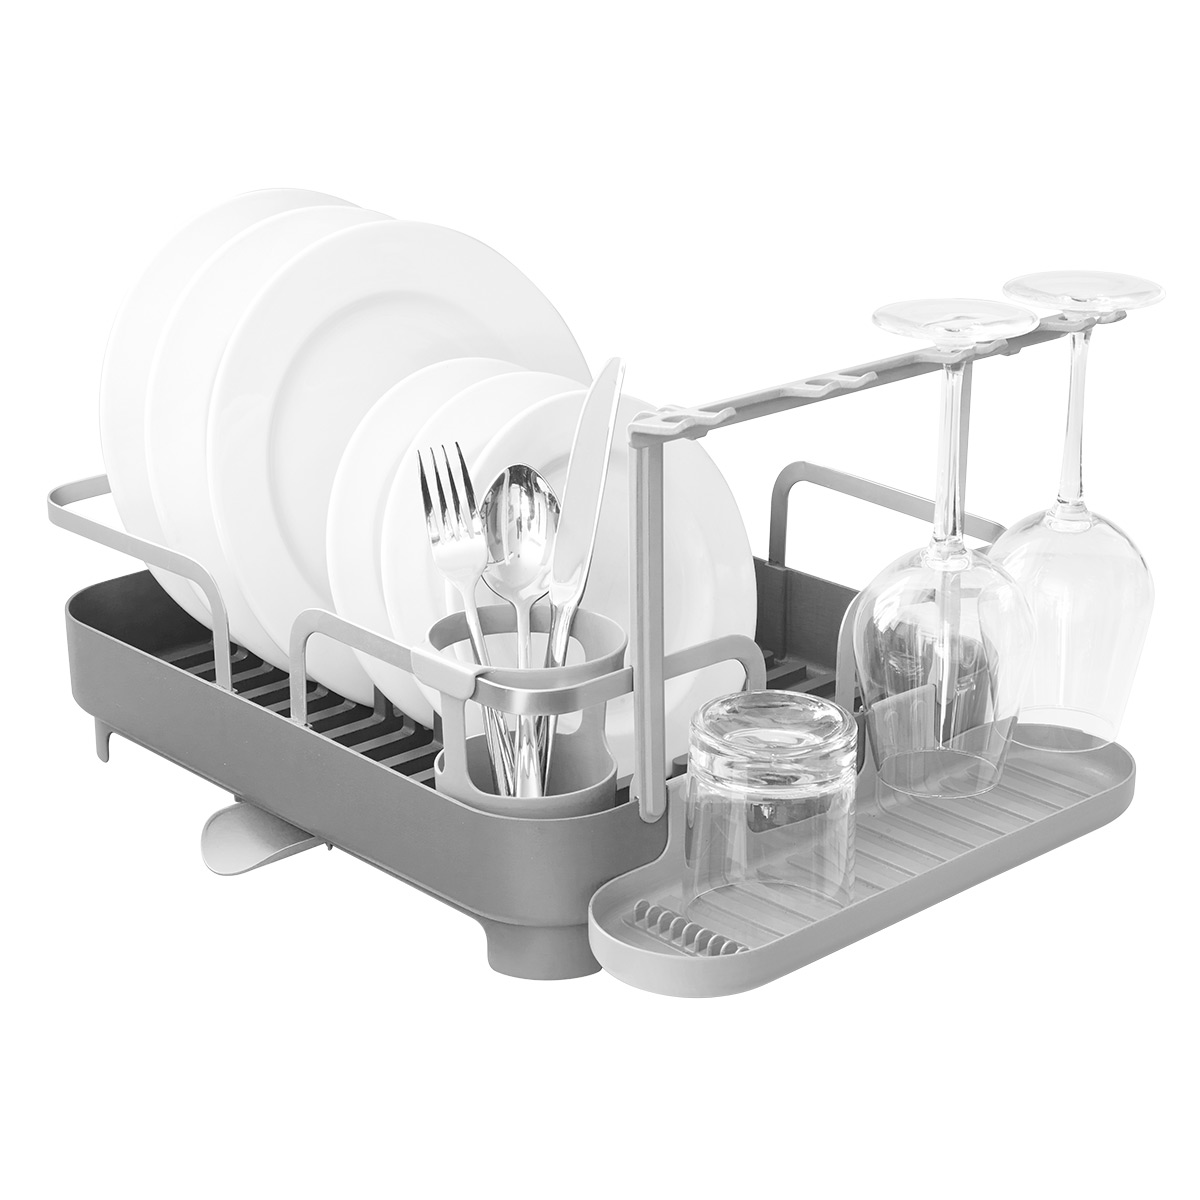 Umbra Holster Dish Rack | The Container Store